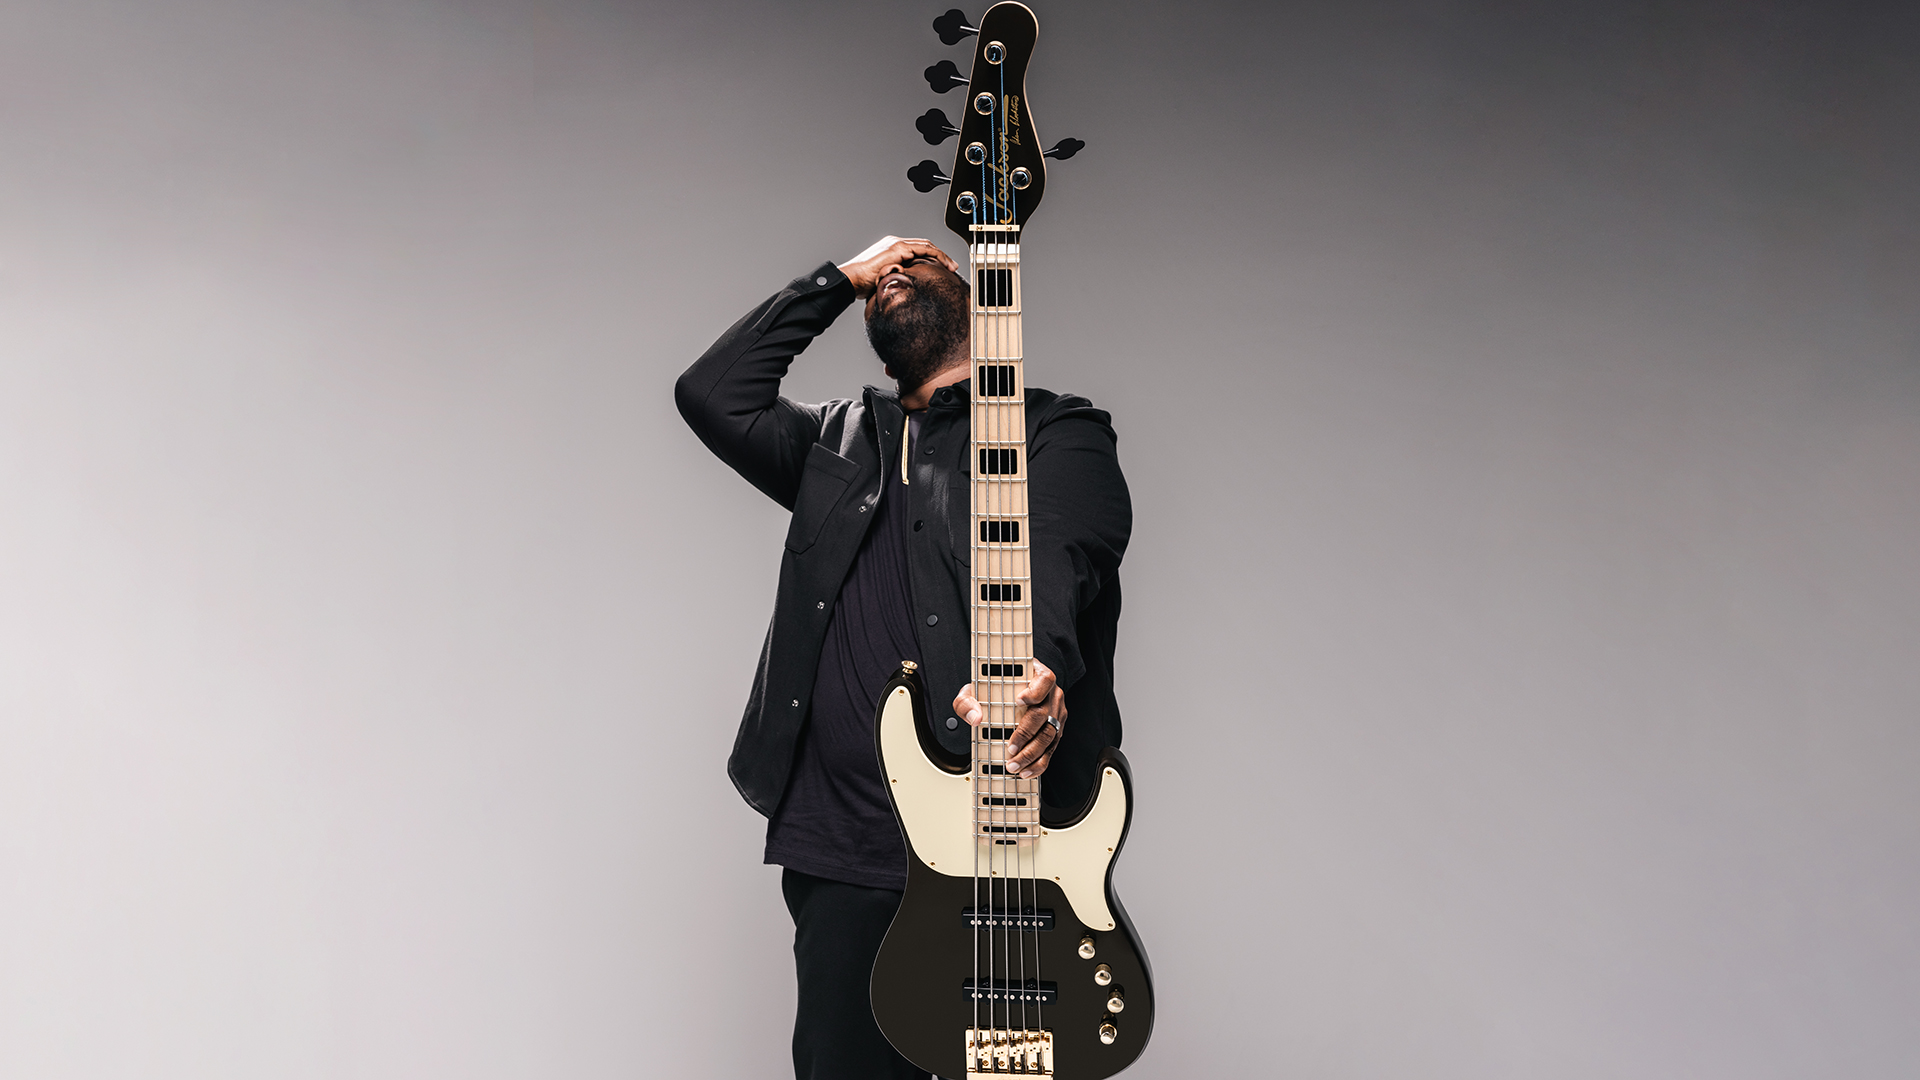 “Whether it be Saturday Night Live or the Grammys – this bass has held its own on every stage”: MD to the stars, Adam Blackstone, debuts a signature bass named after his grandmother – the Jackson Gladys Pro Series Concert